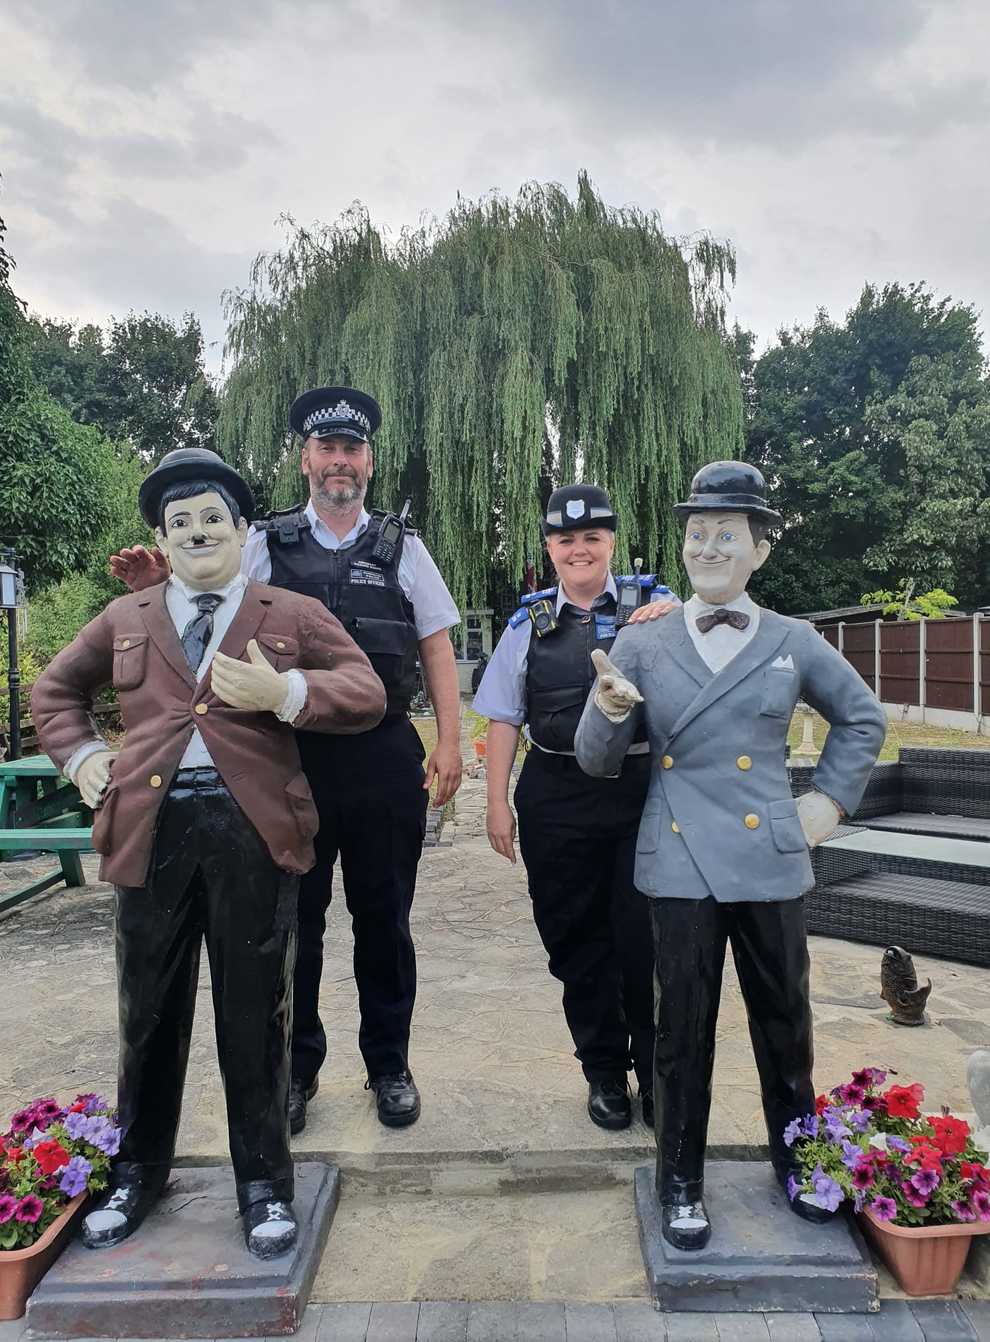 Sergeant Richard Ruane and PCSO Natalie Parrott with the Laurel and Hardy statues (Lesley Haylett/PA)